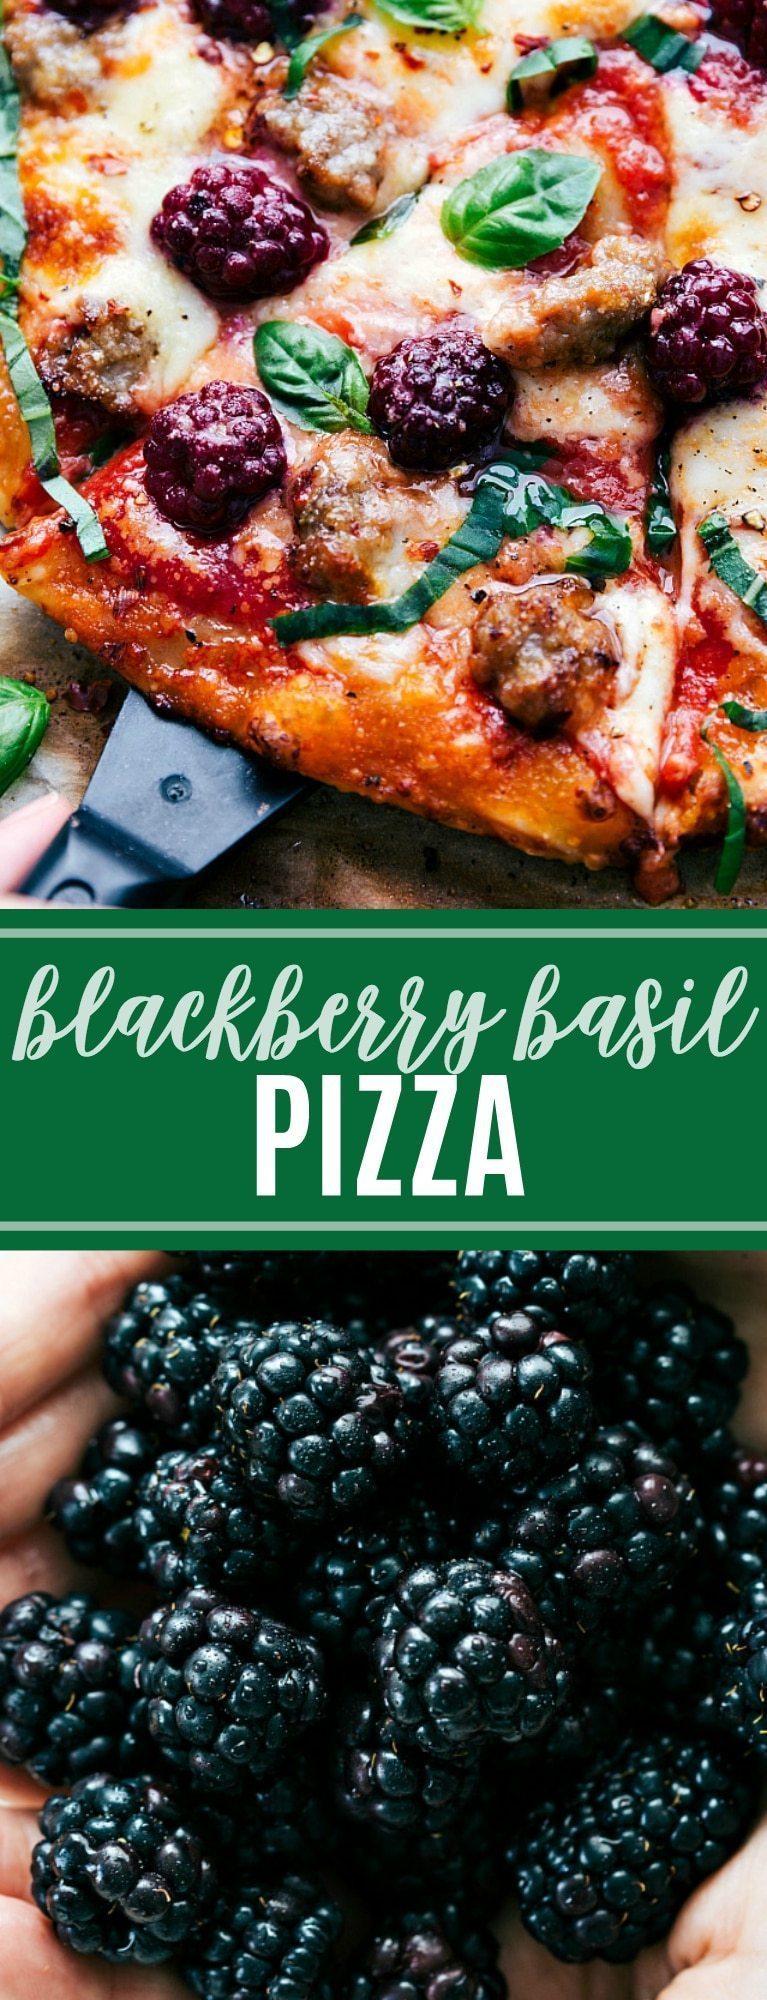 30-minute blackberry basil and sausage pizza | chelseasmessyapron.com | #pizza #blackberry #basil #easy #quick #familyfriendly #dinner #easy #healthy #health #blackberry #basil #pizza